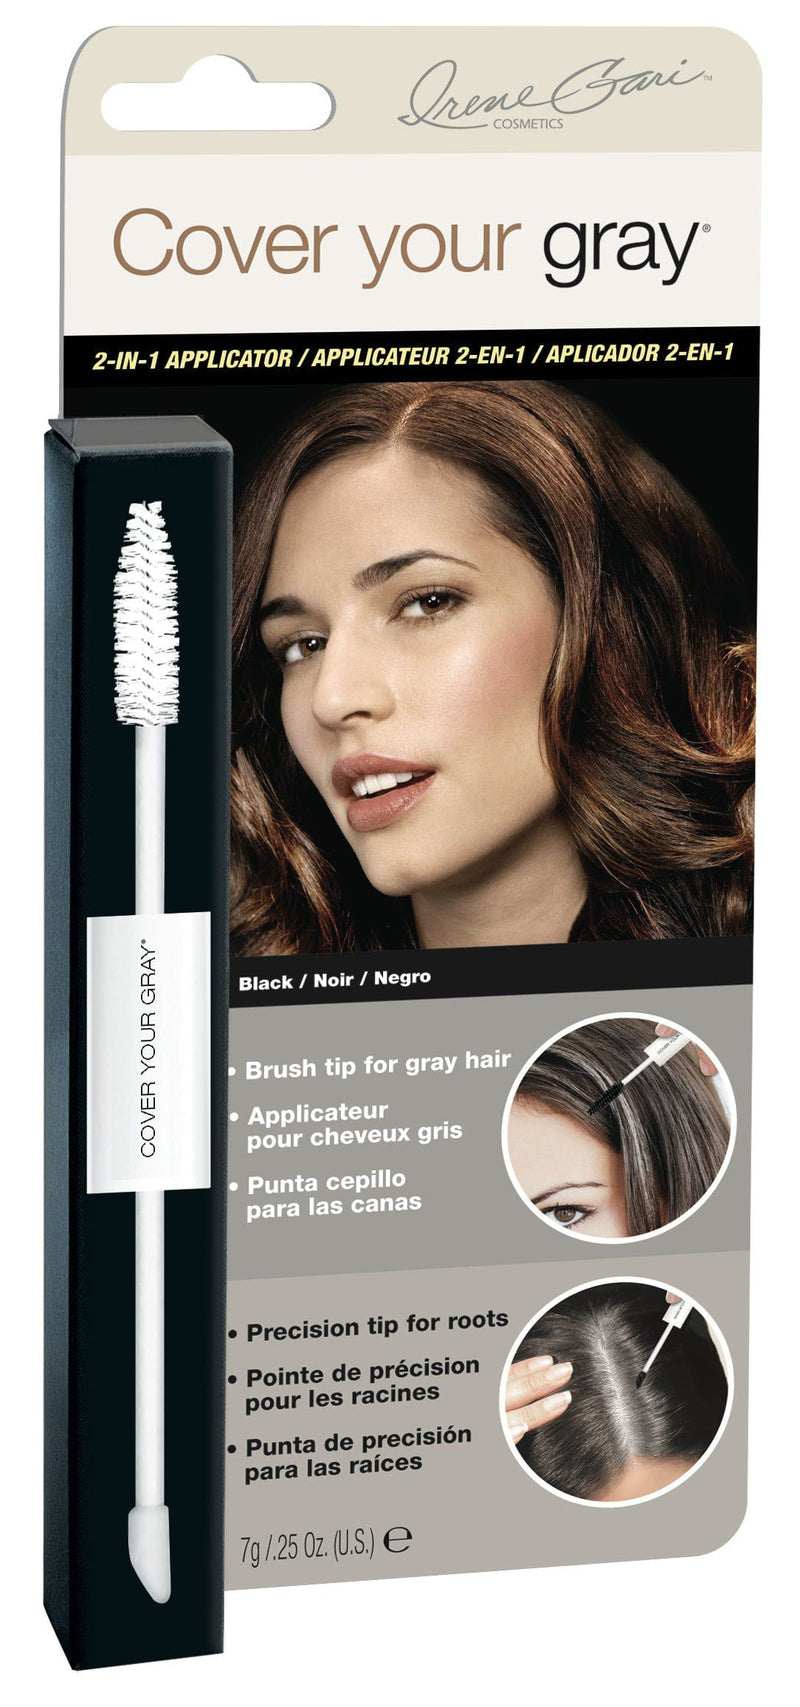 Cover your gray IG Cover Your Gray 2-IN-1 Applicator Brush Black Irene Gari Cover Your Gray 2in1 Hair Color Touch Up 7g